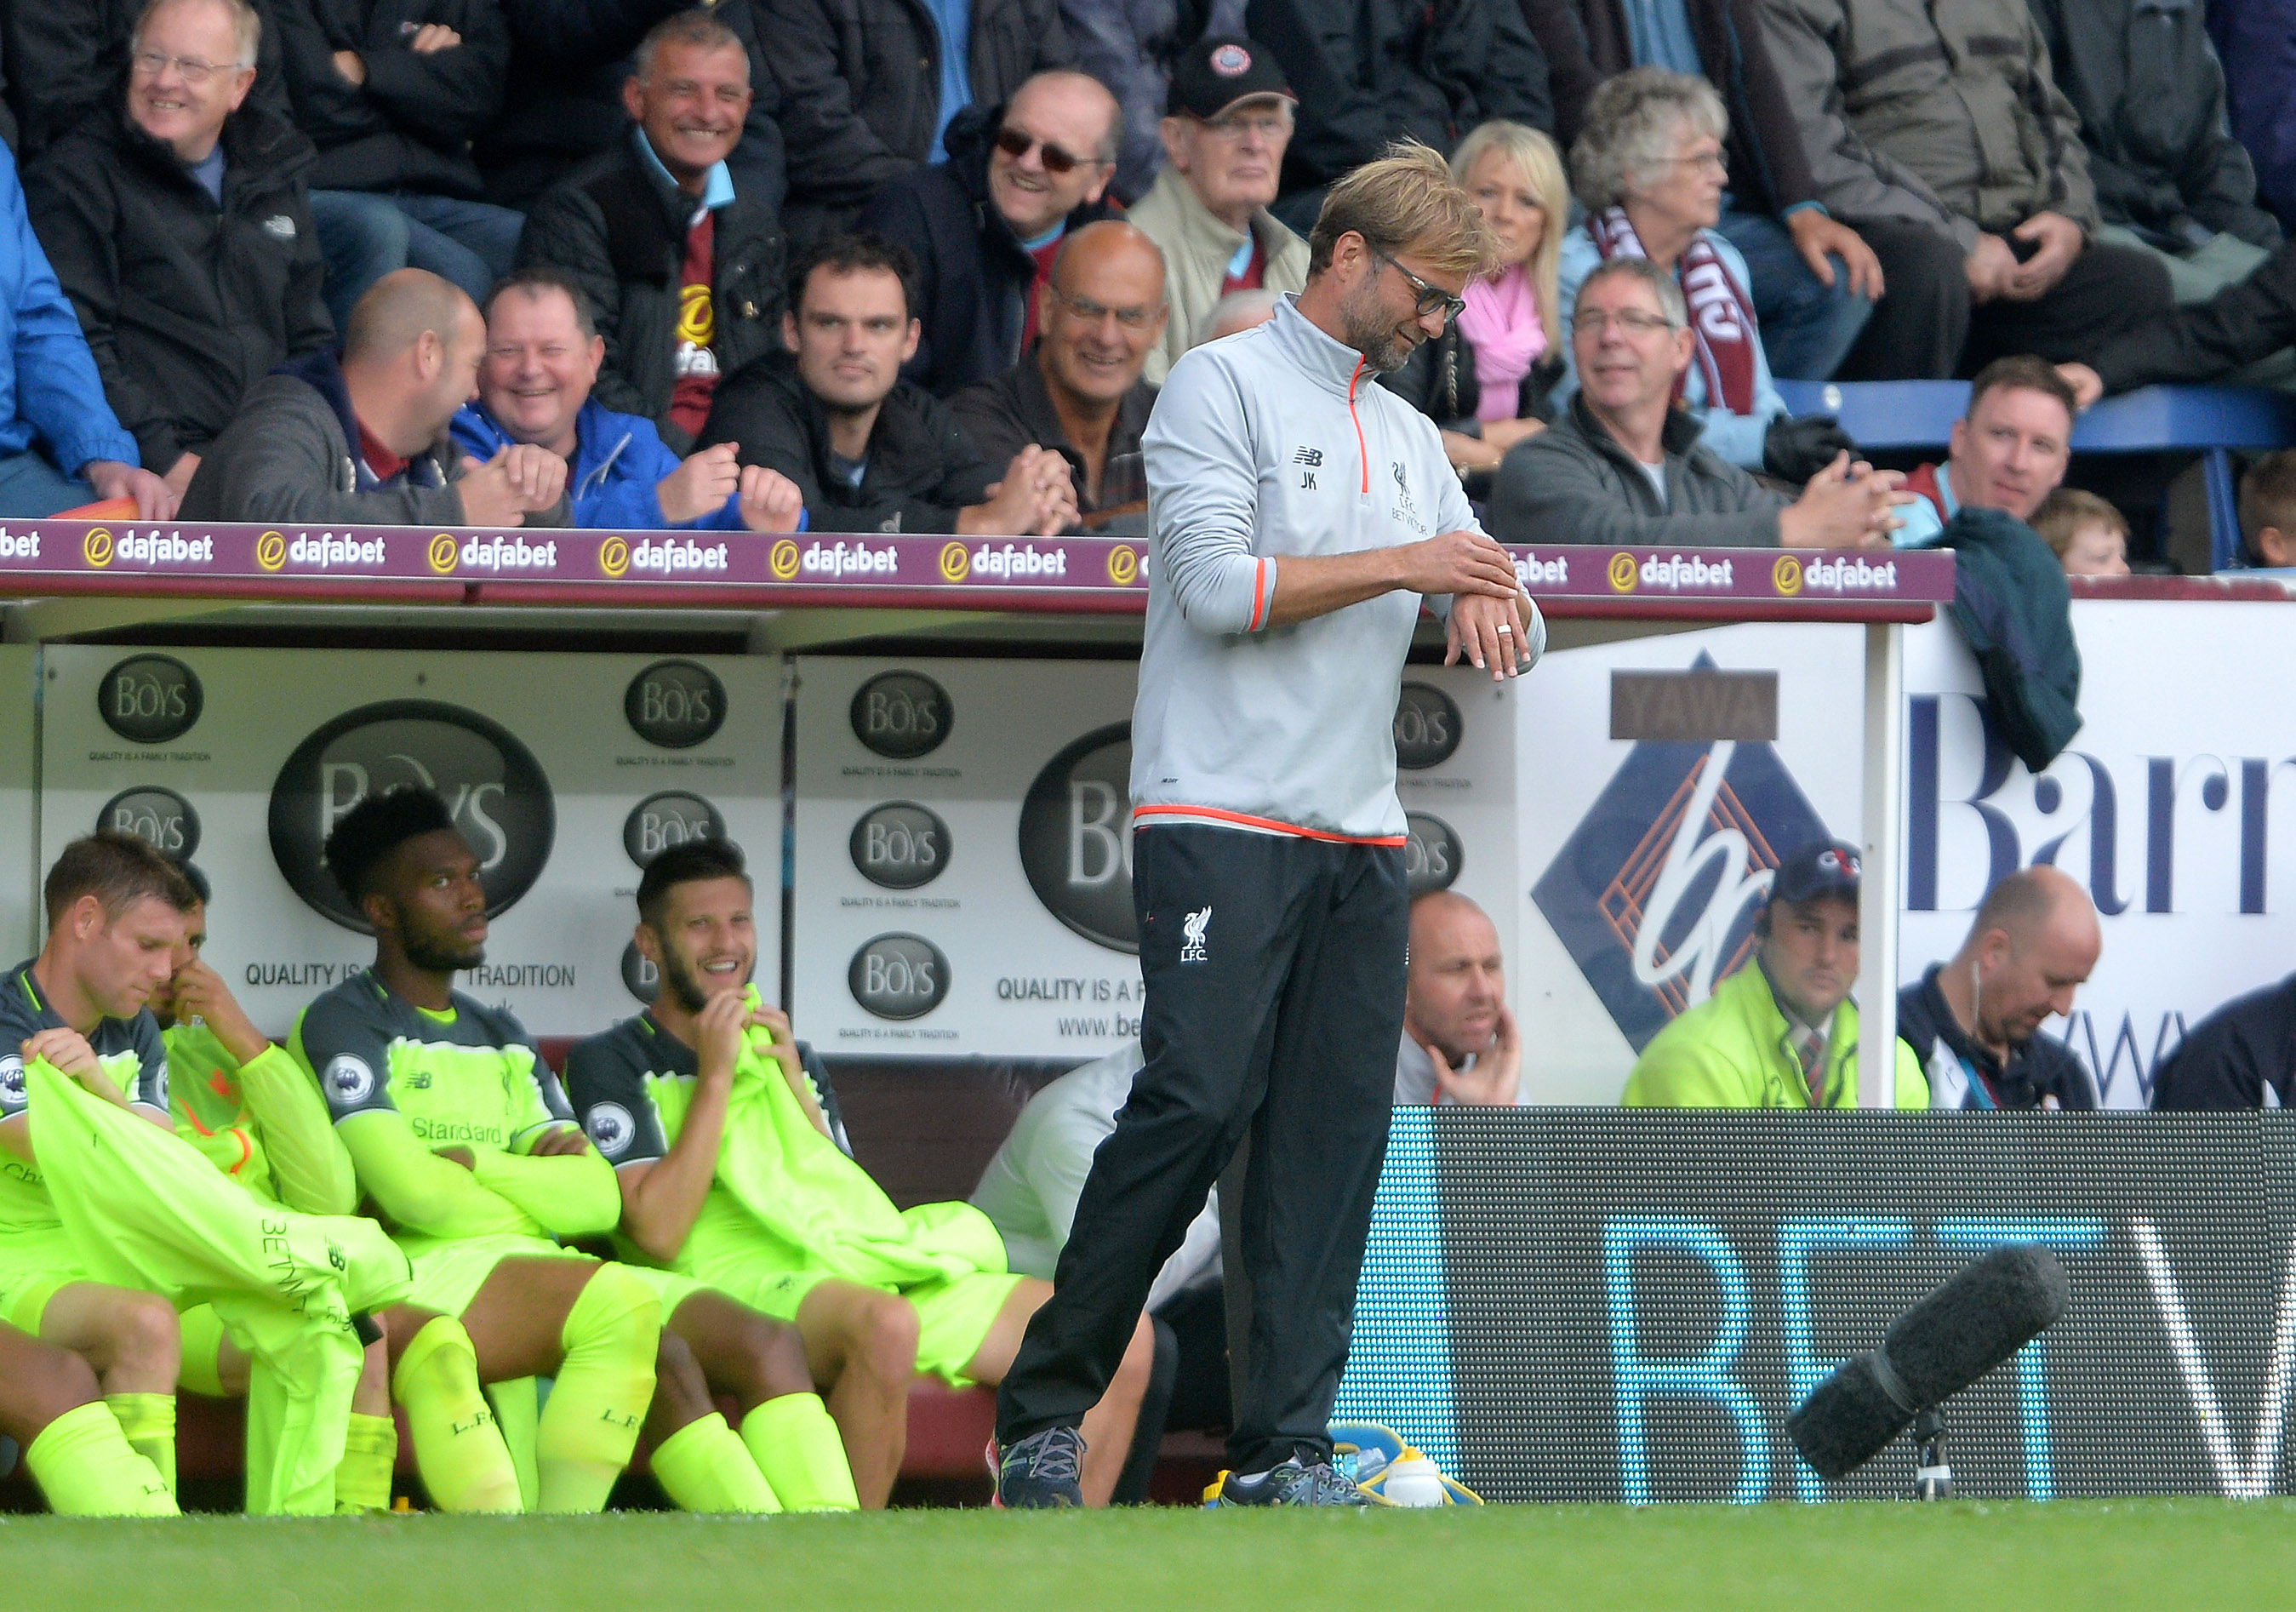 BURNLEY, ENGLAND - AUGUST 20: Liverpool manager Jurgen Klopp checks his watch during the Premier League match between Burnley FC and Liverpool FC at Turf Moor on August 20, 2016 in Burnley, England. (Photo by Mark Runnacles/Getty Images)